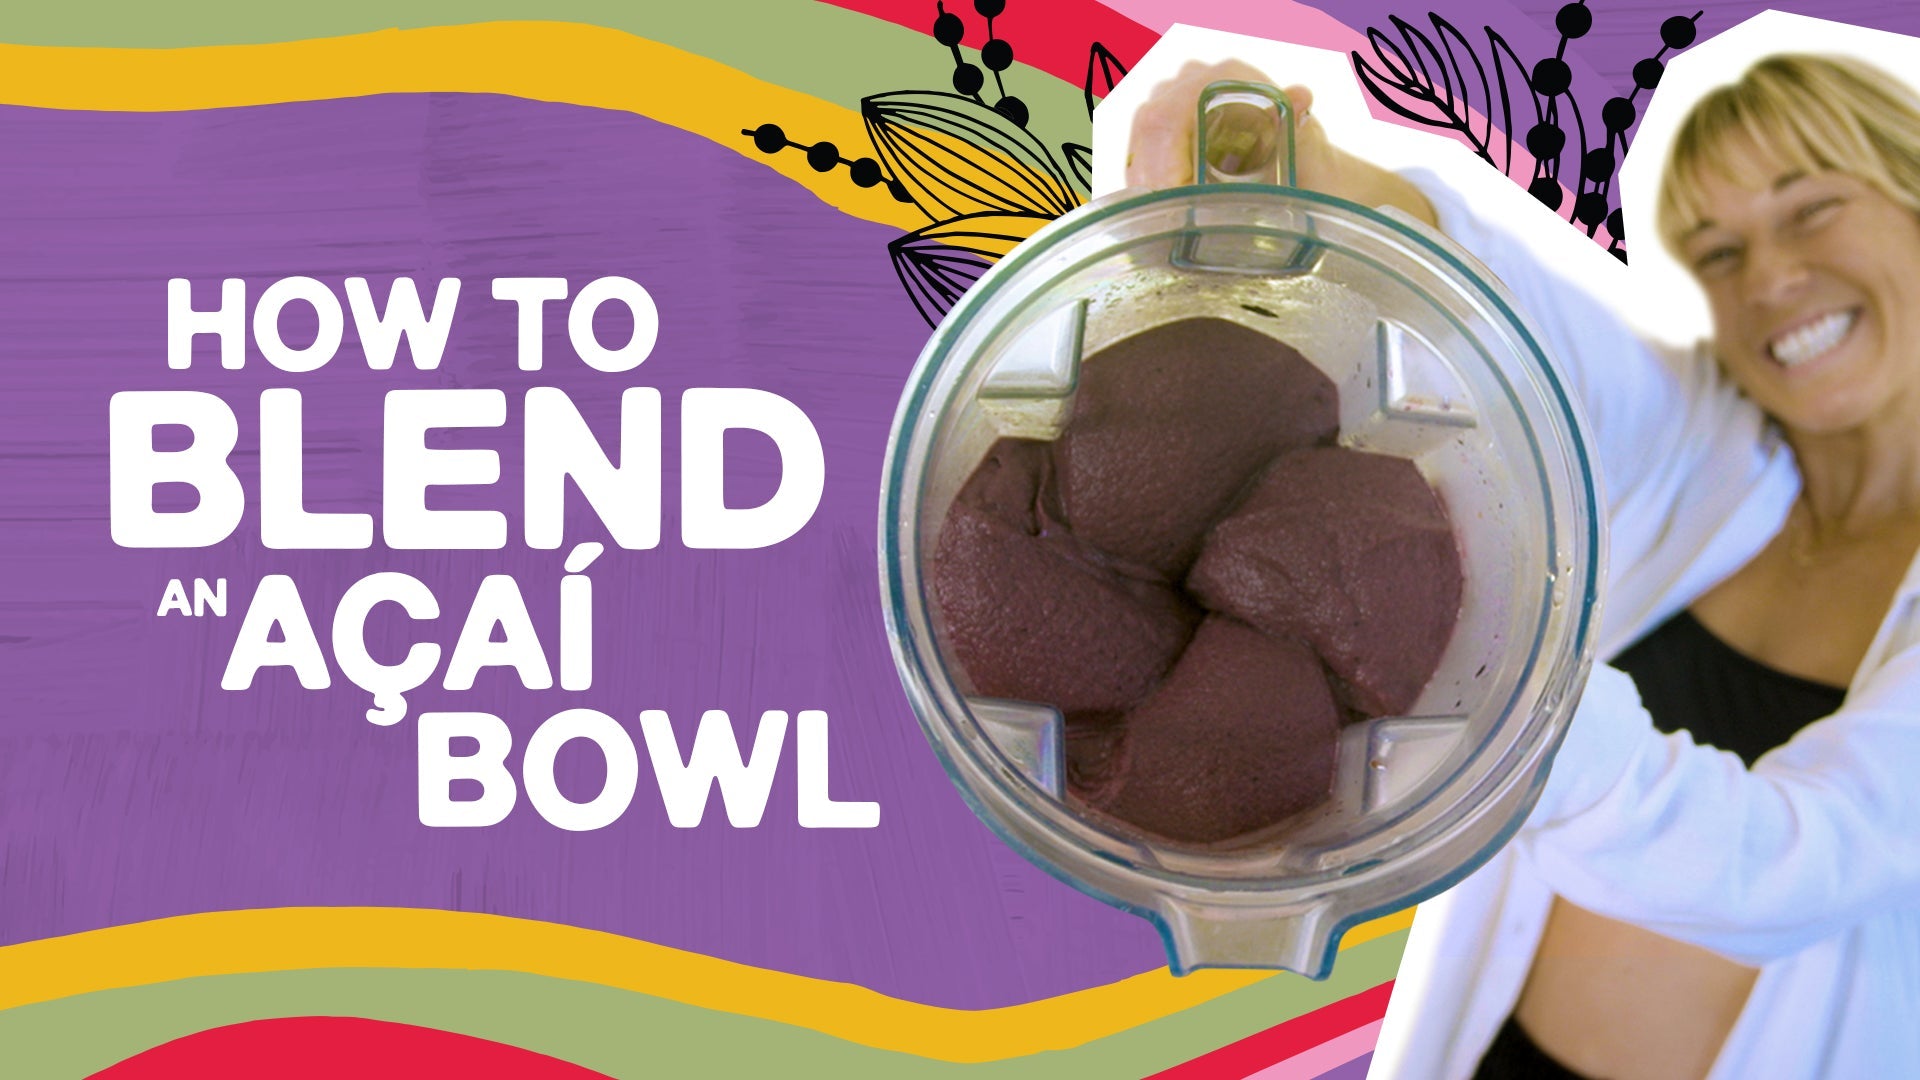 Load video: how to blend an acai bowl